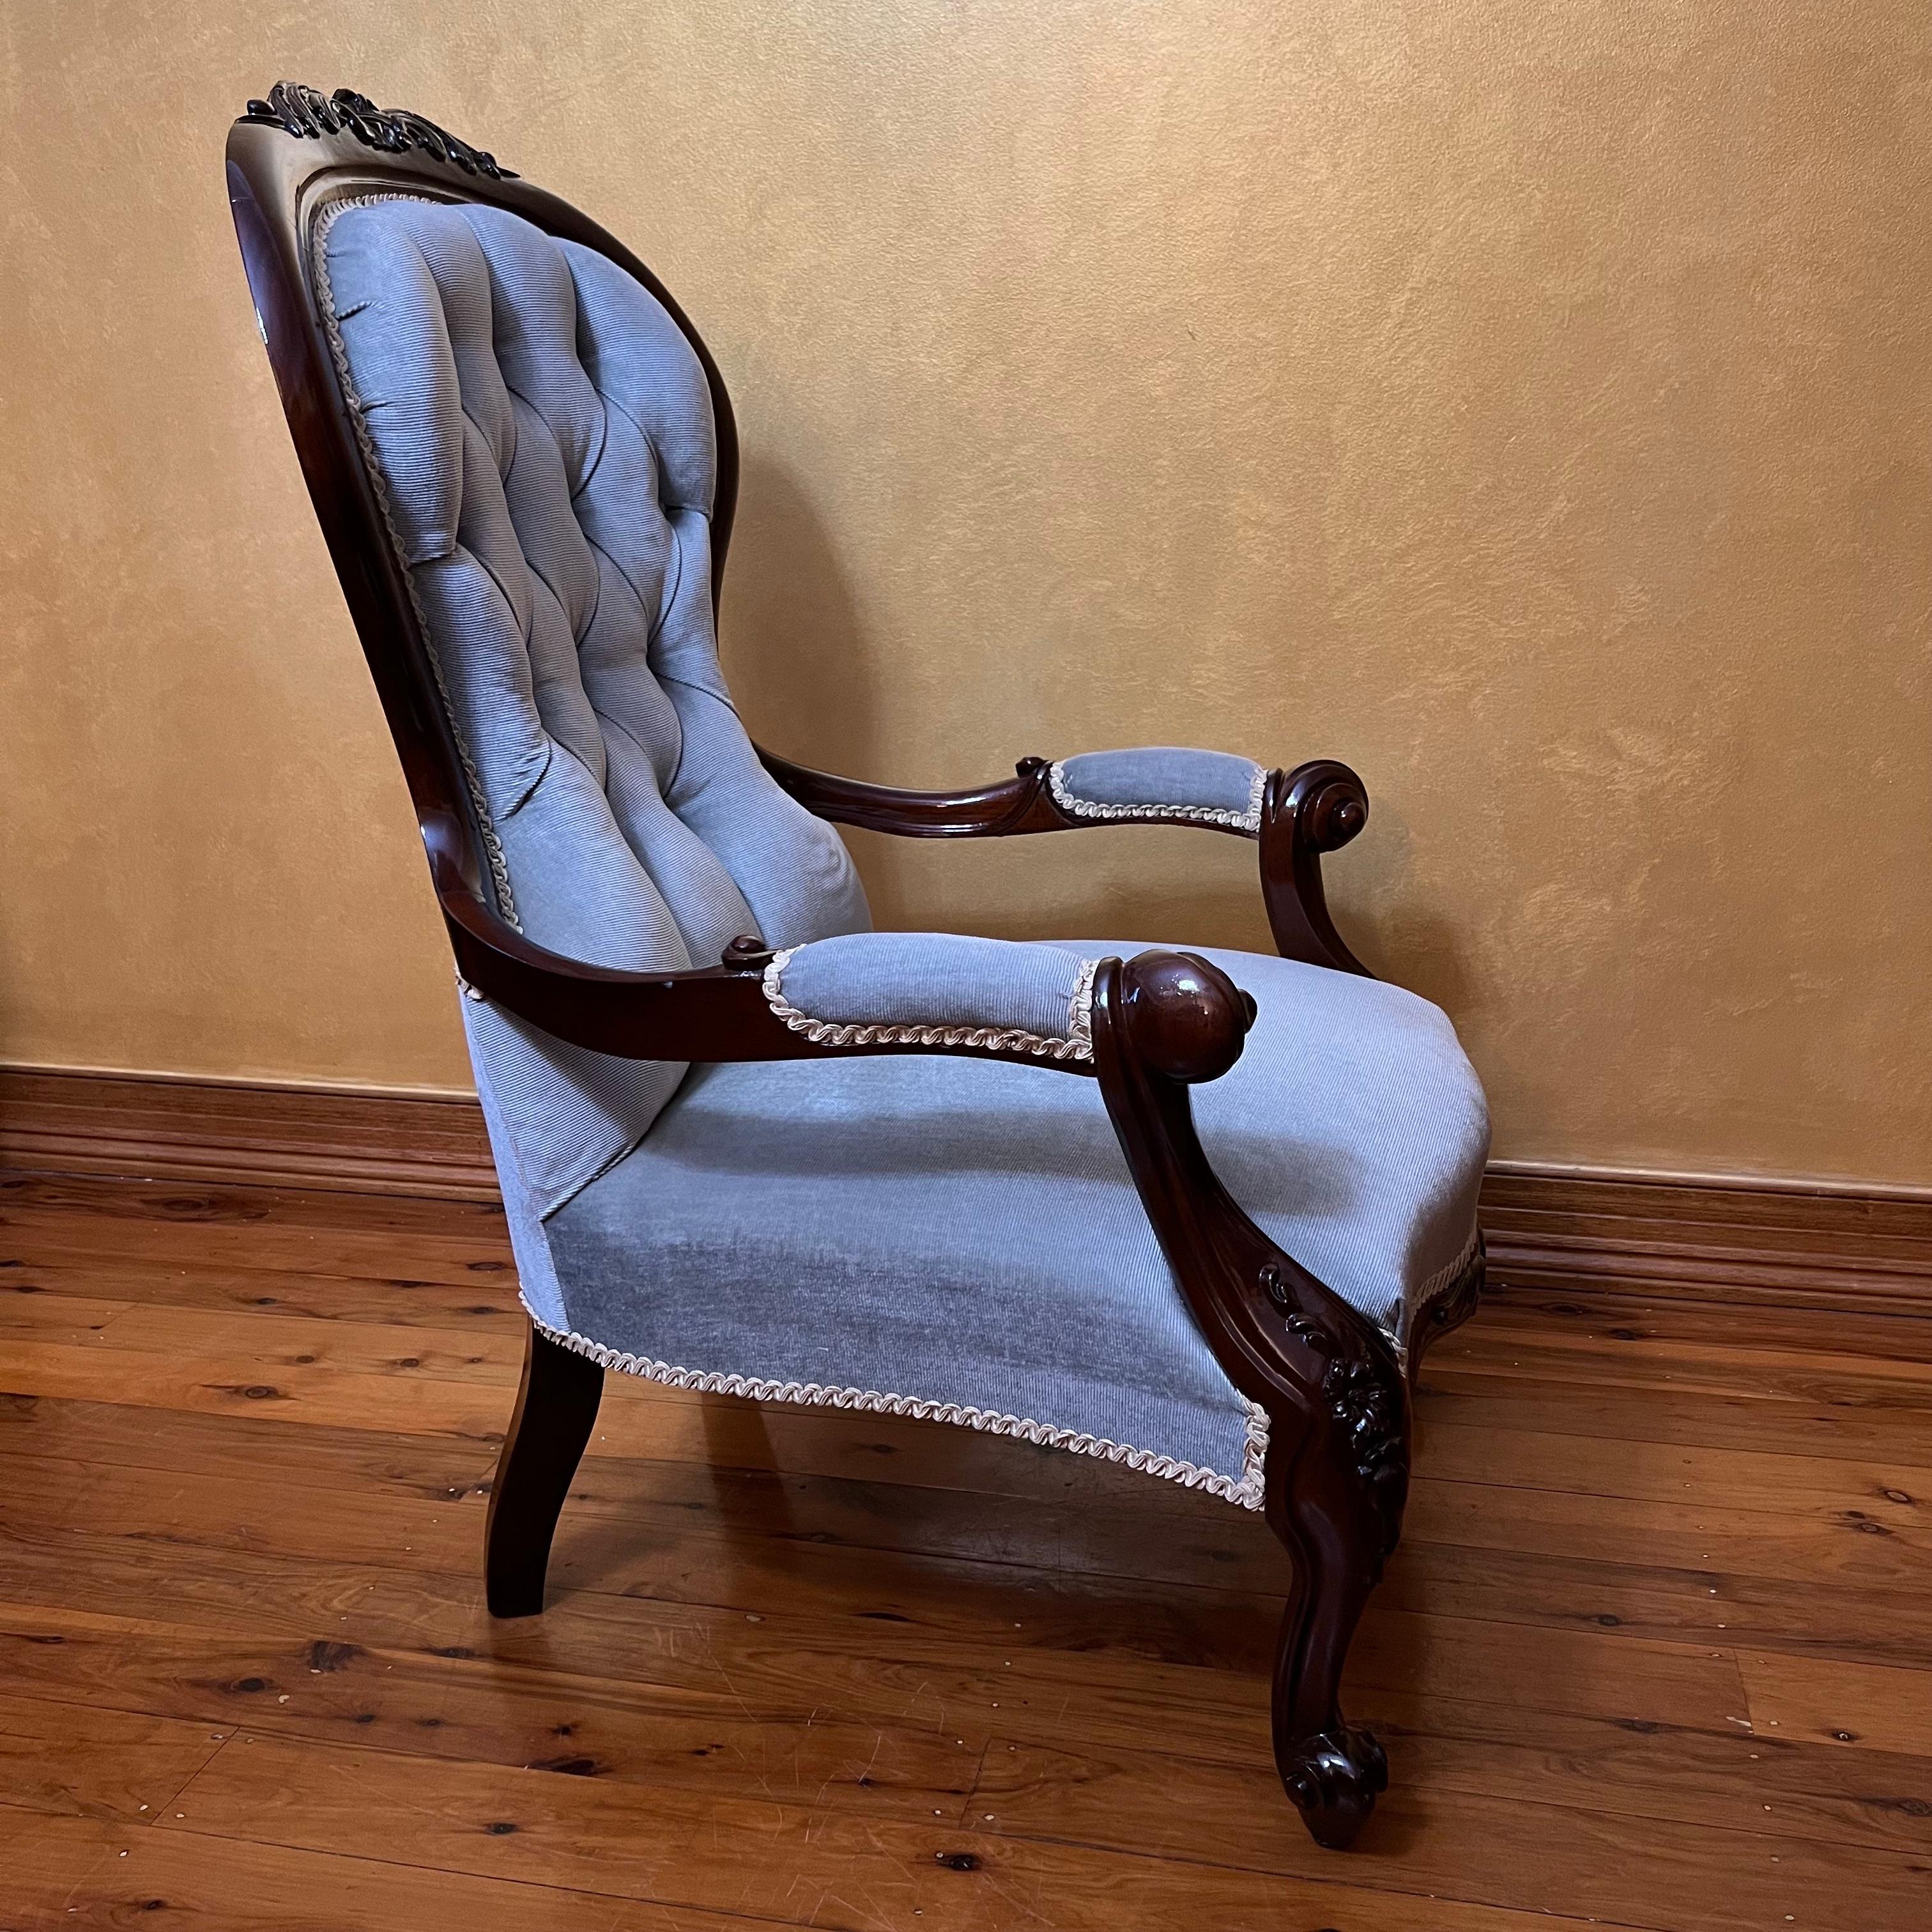 Carved detail throughout chair, with green velvet upholstery with button back detail and arm rest

Circa: Late 19th Century 

Material: Cedar

Measurements: 97cm high, 65cm length 76cm width 

Pick Up Location at: 64 Kalang Road, Edensor